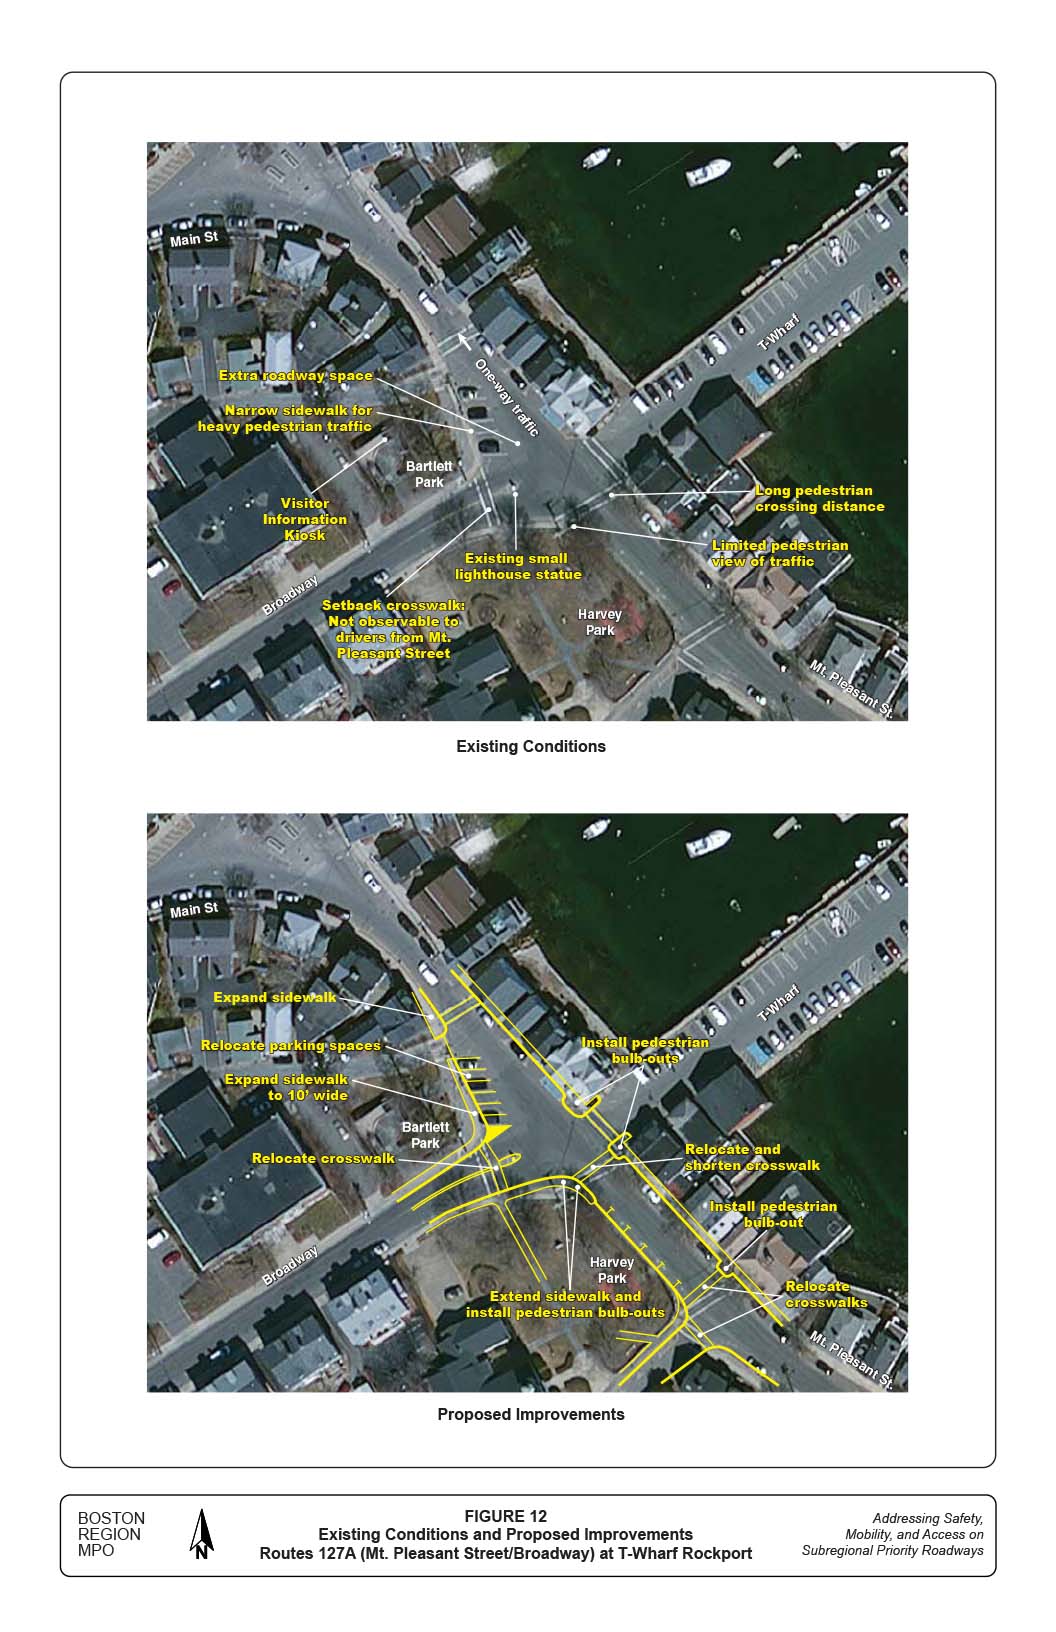 FIGURE 12. Existing Conditions and Proposed Improvements Routes 127A (Mt. Pleasant Street/Broadway) at T-Wharf Rockport
This figure contains two aerial-view maps of the intersection of Routes 127A (Mt. Pleasant Street/Broadway) at T-Wharf Rockport in the study area. The maps denote, with both text and pointing arrows, the existing conditions and proposed improvements.
1)	The first image, Existing Conditions, cites (in a clock-wise direction): Long pedestrian crossing distance; limited pedestrian view of traffic; existing small lighthouse statue; setback crosswalk: not observable to drivers from Mt. Pleasant Street; visitor information kiosk; narrow sidewalk for heavy pedestrian traffic; and extra roadway space.
2)	The second image, Proposed Improvements, cites (in a clock-wise direction): Install pedestrian bulb-outs; relocate and shorten crosswalk; install pedestrian bulb-out; relocate crosswalks; extend sidewalk and install pedestrian bulb-outs; relocate crosswalk; expand sidewalk to 10’ wide; relocate parking spaces; and expand sidewalk.
